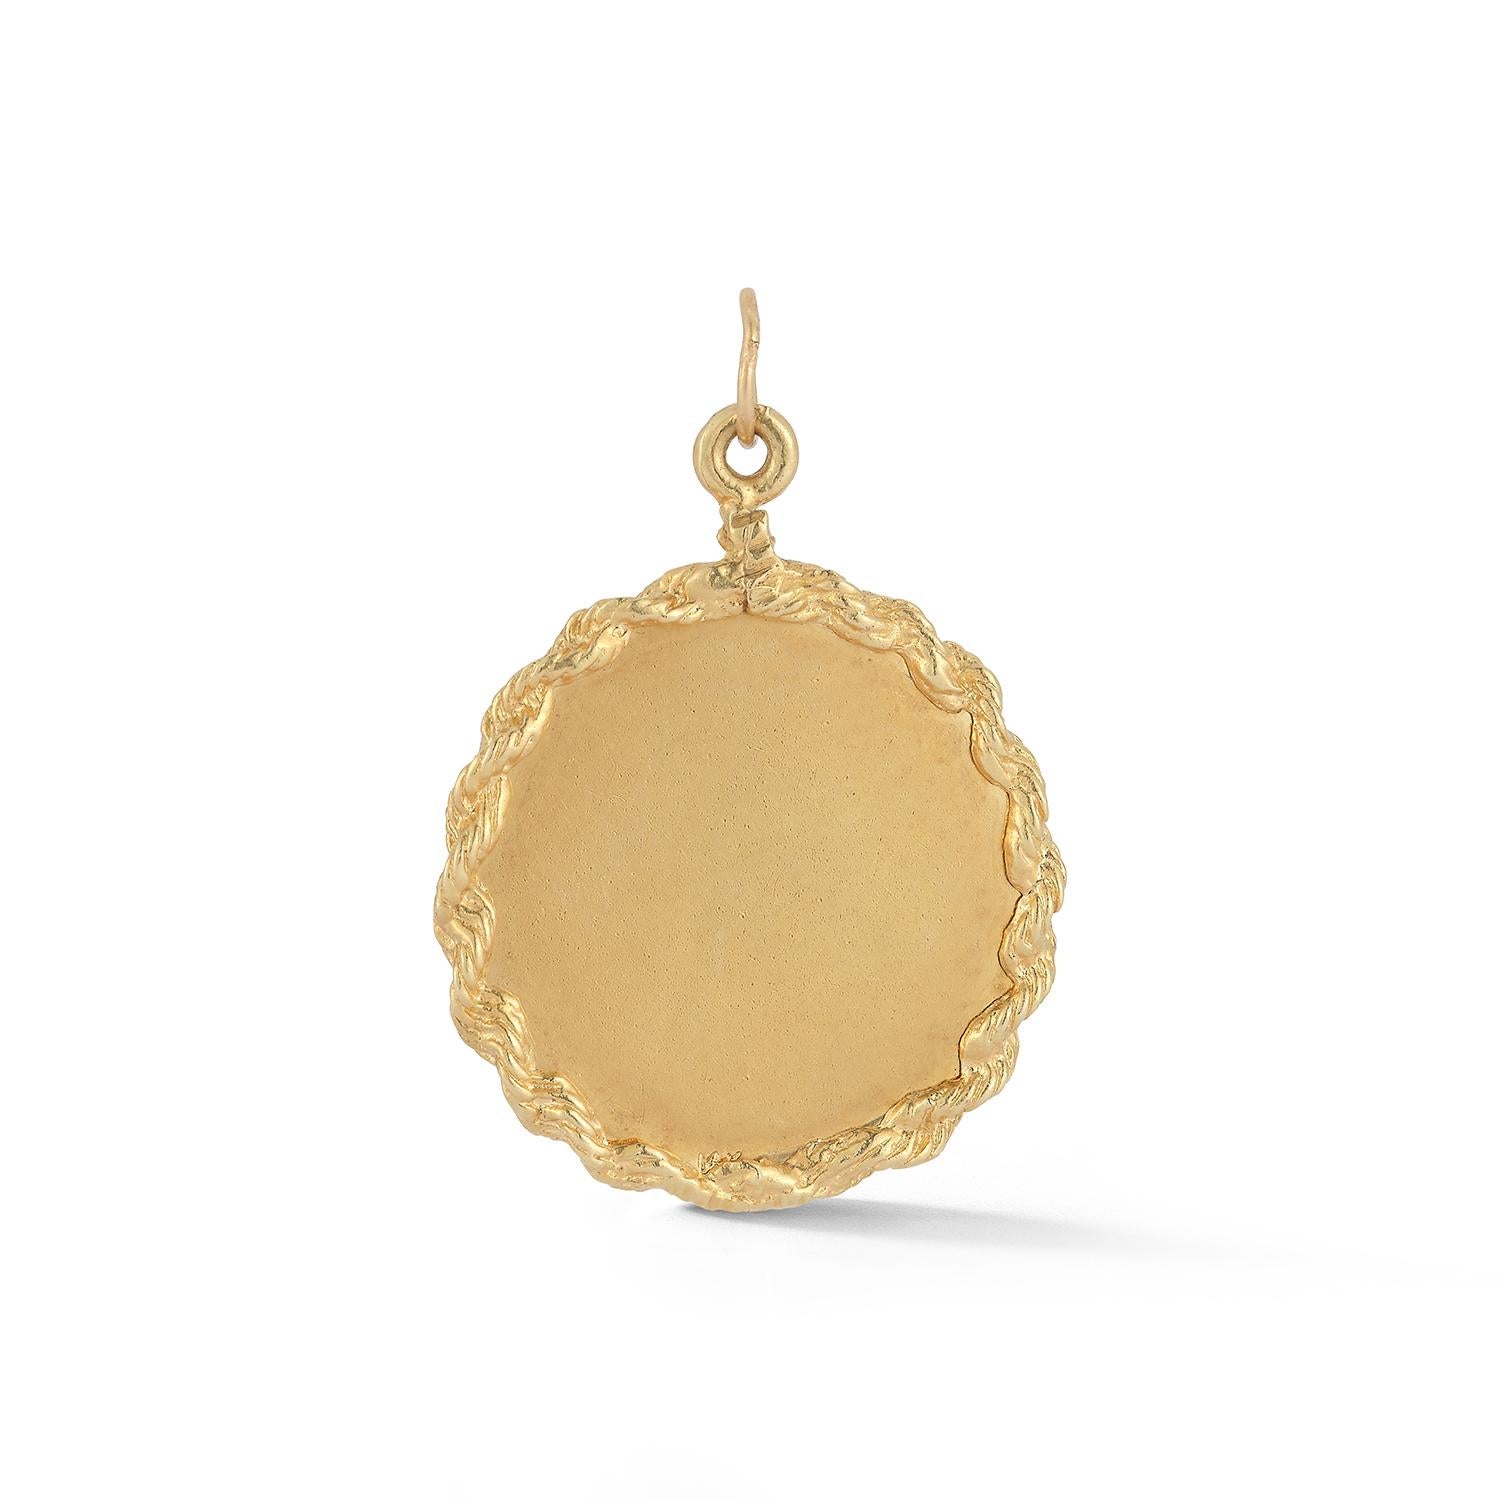 An epic retro-chic rope bordered medallion. Place a photo within it's center like a picture locket (the shiny middle border allows a photo to be held tight), wear plain on a long chain or allow us to hand engrave a monogram in the center.

We love